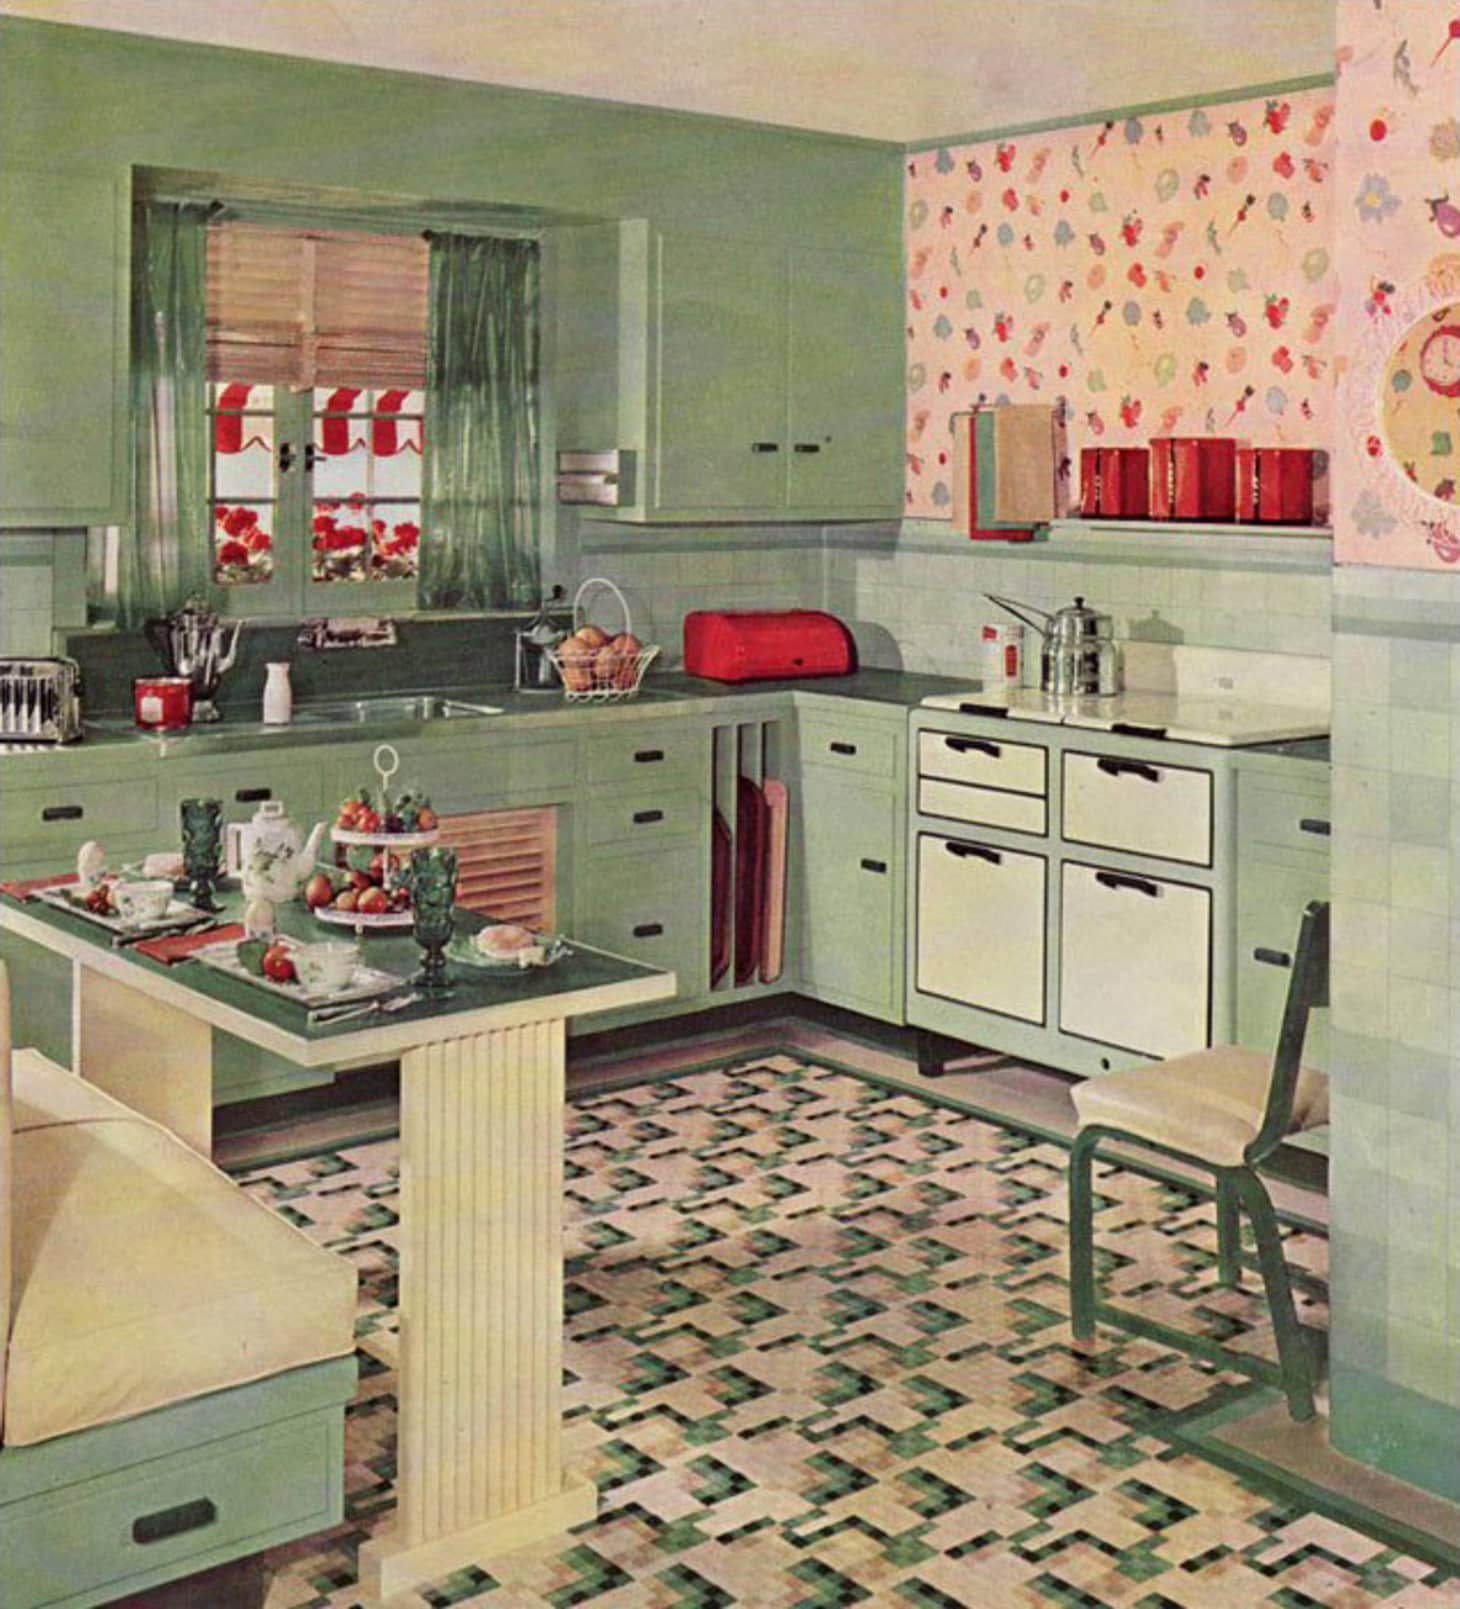 A Brief History Of Kitchen Design From The 1930s To 1940s